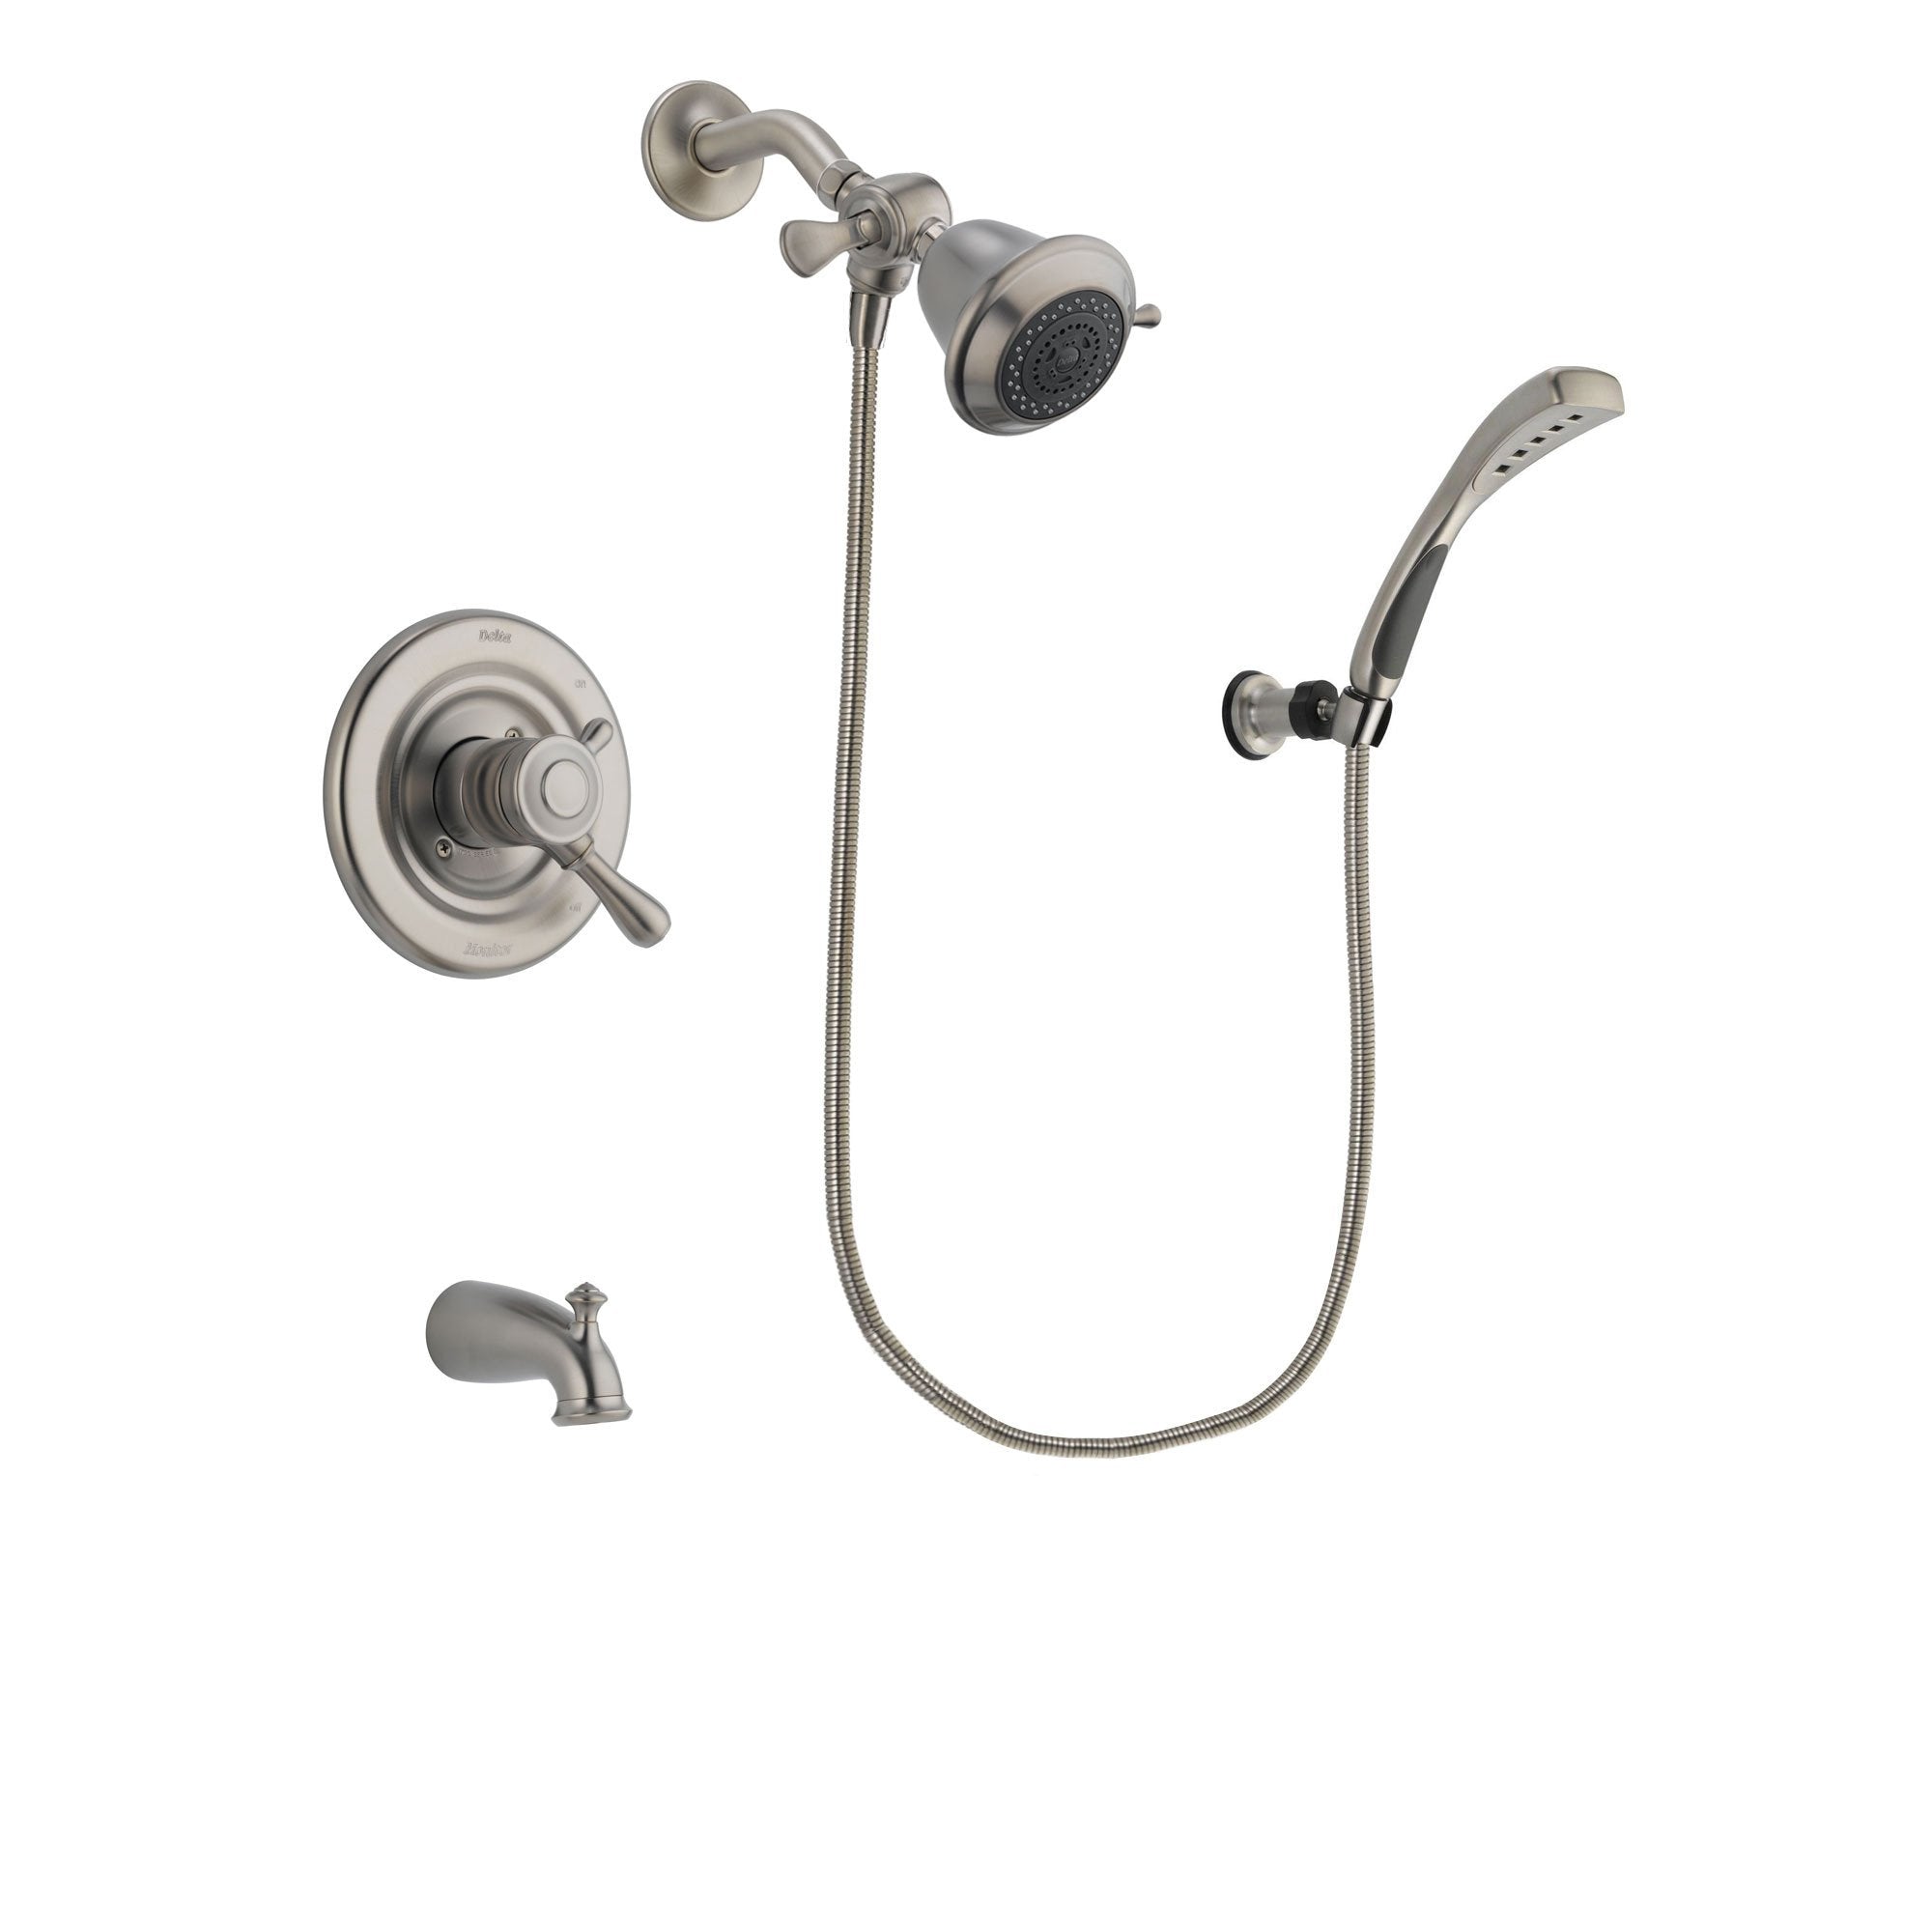 Delta Leland Stainless Steel Finish Dual Control Tub and Shower Faucet System Package with Shower Head and Wall Mounted Handshower Includes Rough-in Valve and Tub Spout DSP1811V